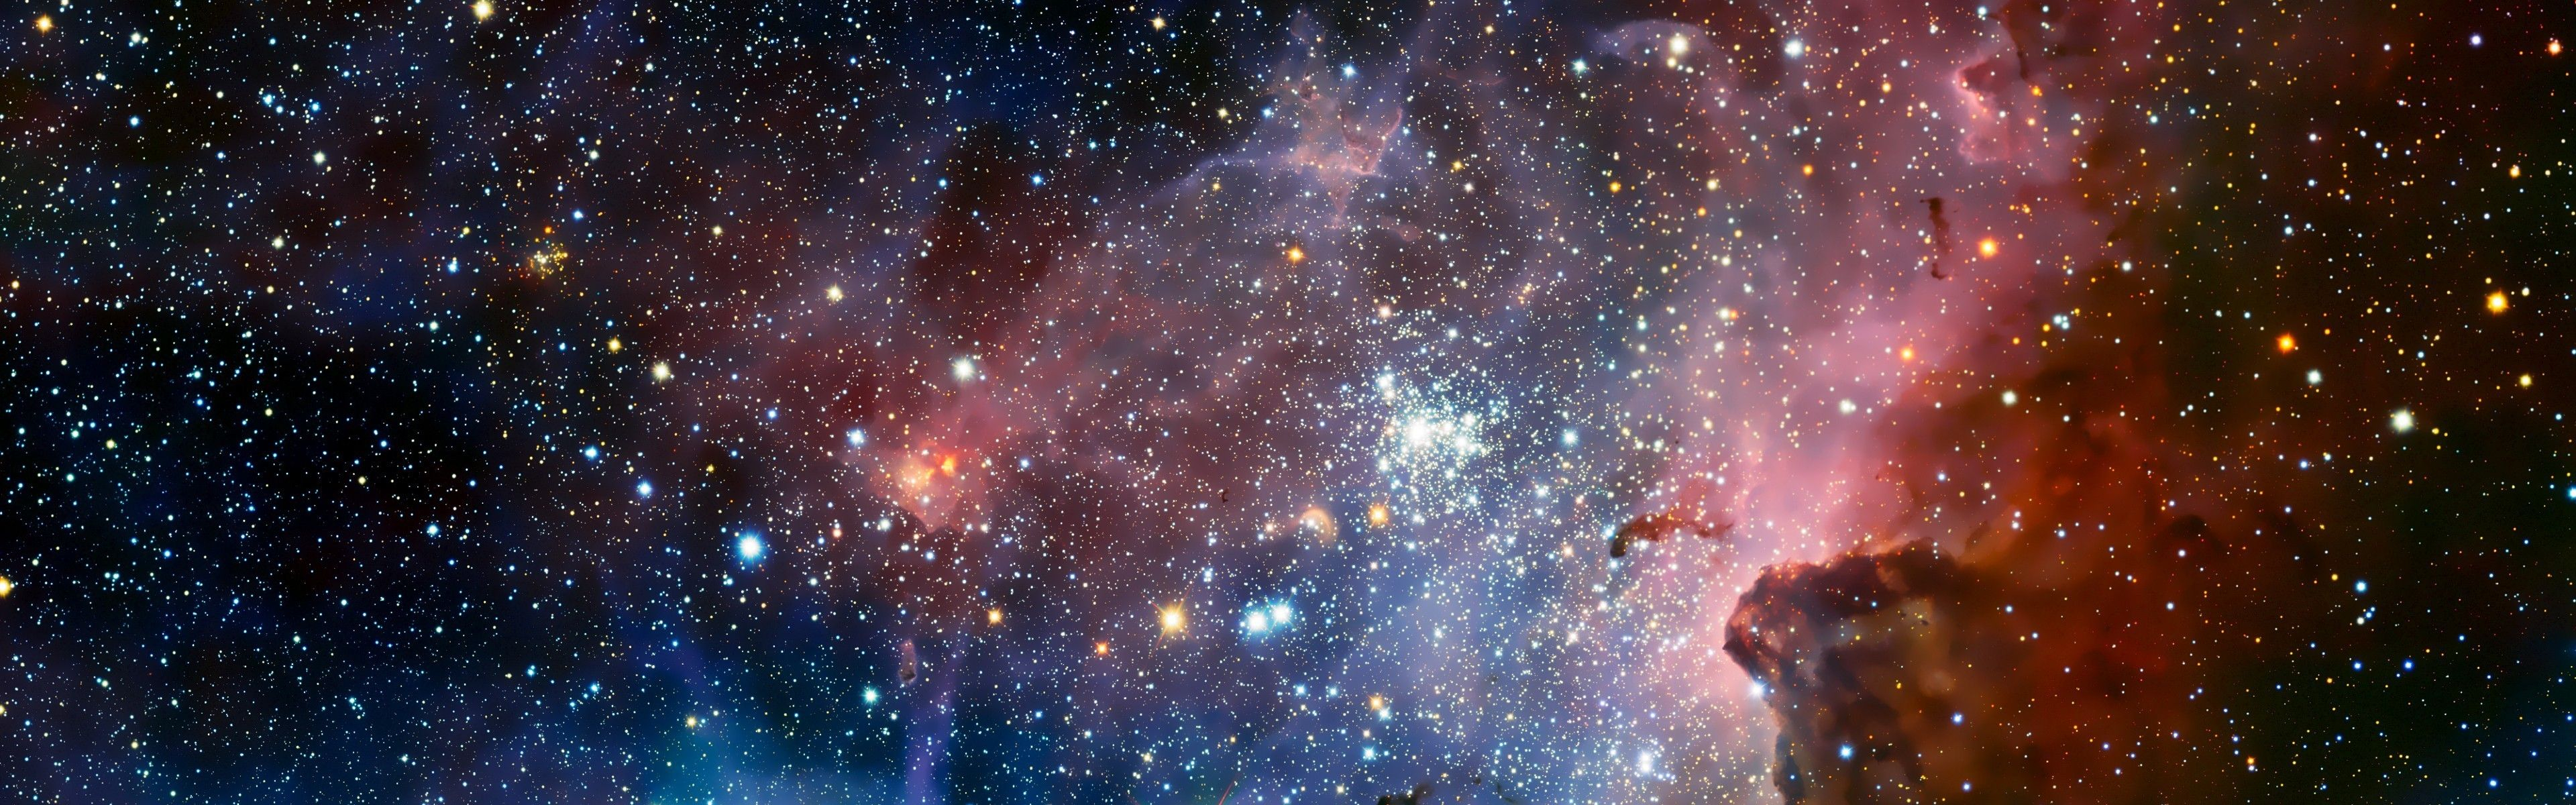 3840x1200 3840X1200 Space Wallpapers Top Free 3840X1200 Space Backgrounds